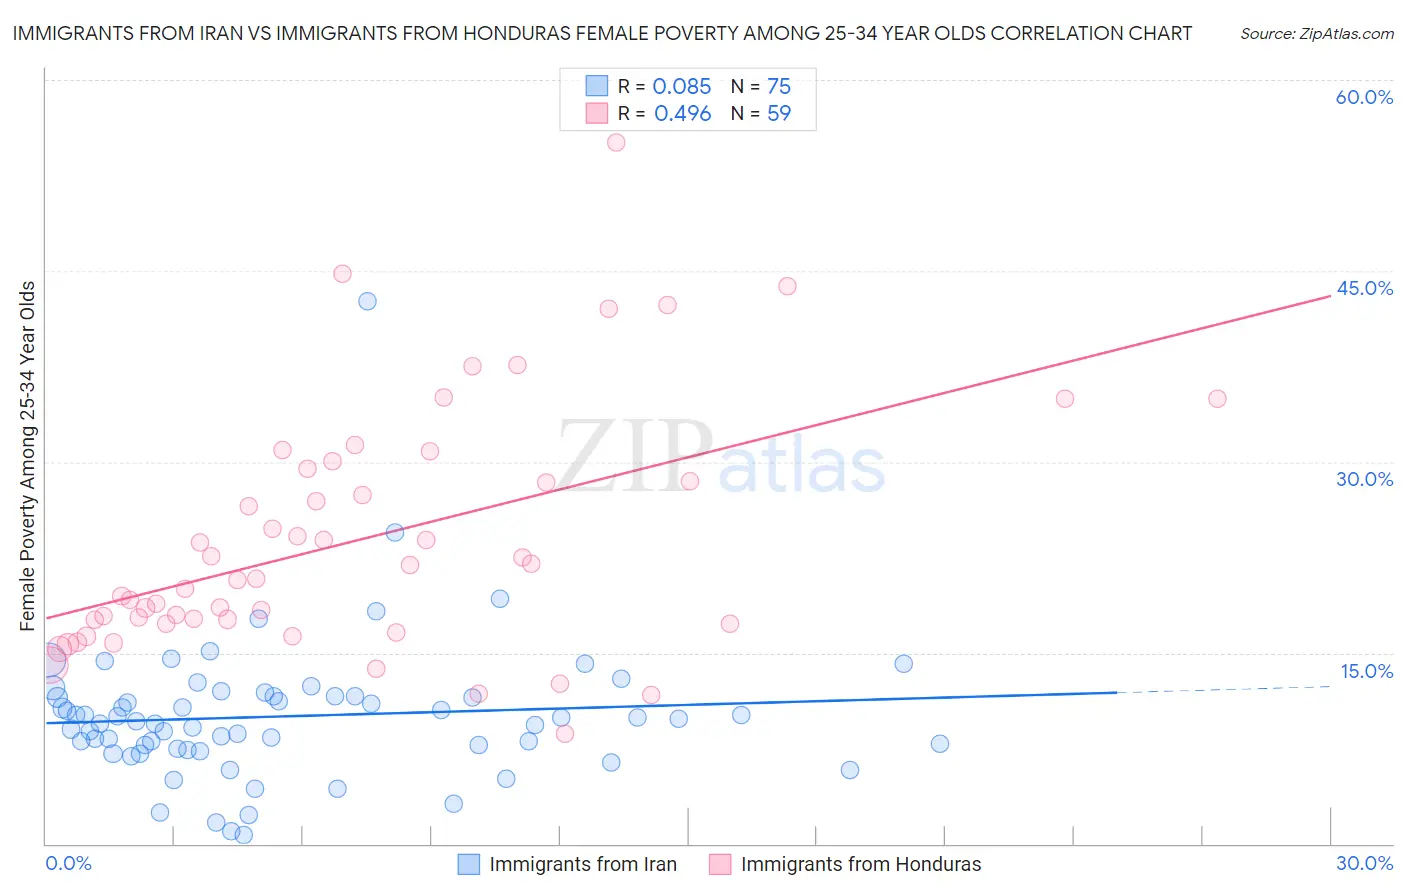 Immigrants from Iran vs Immigrants from Honduras Female Poverty Among 25-34 Year Olds